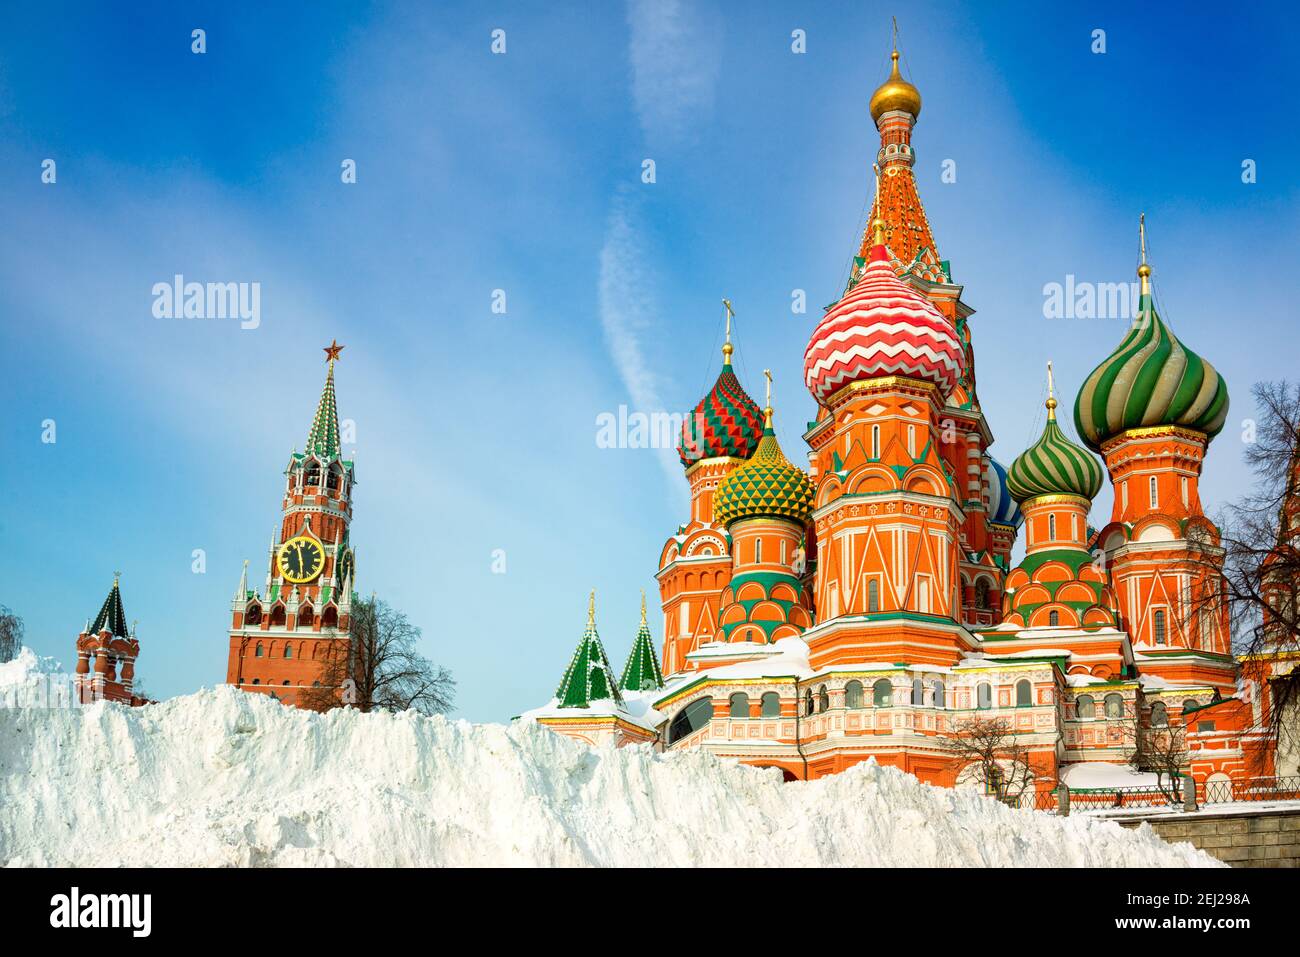 Snow pile near St. Basil's Cathedral, winter, Moscow, Russia. Stock Photo